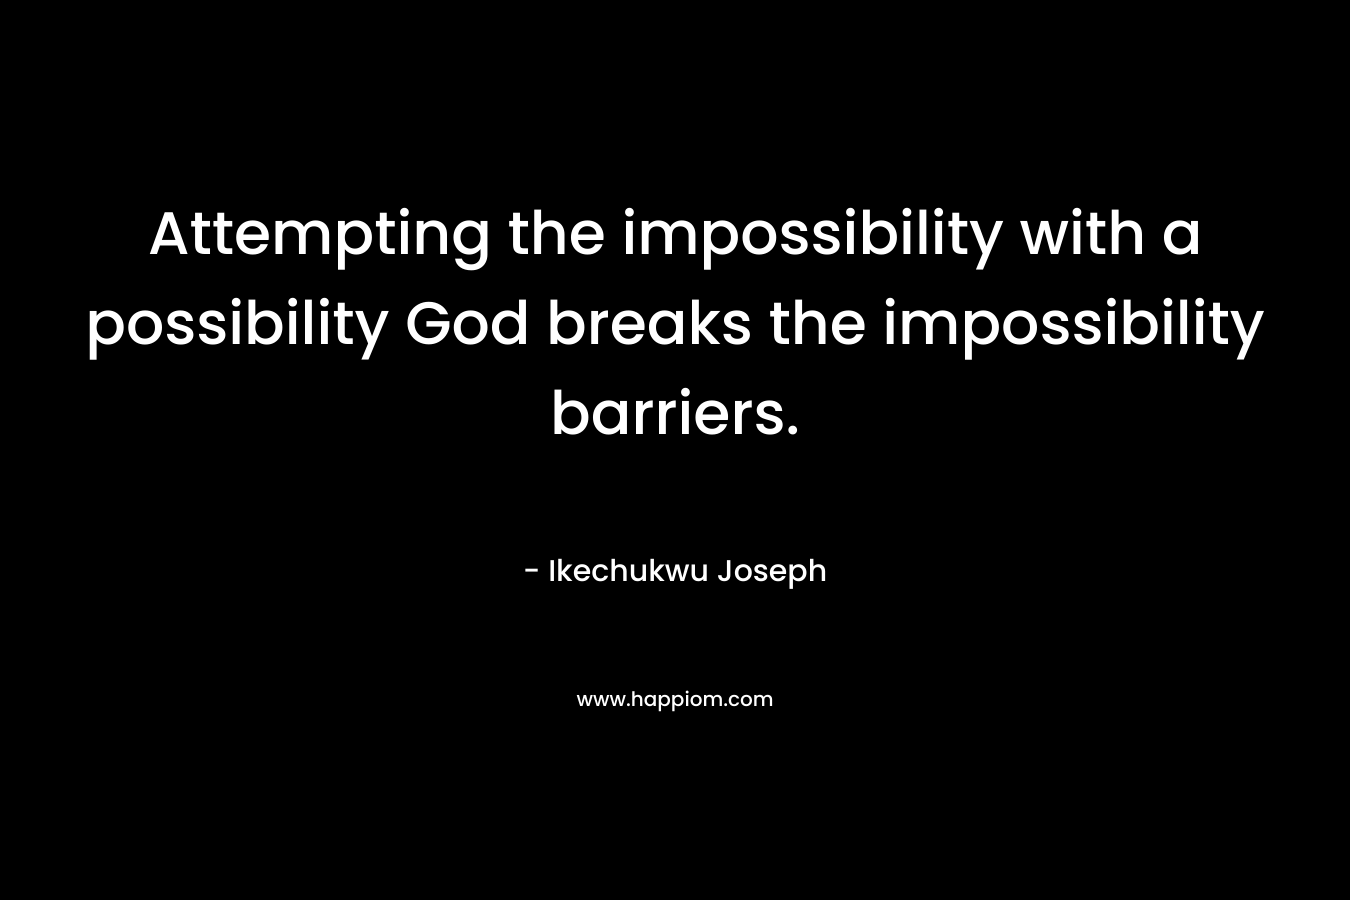 Attempting the impossibility with a possibility God breaks the impossibility barriers.